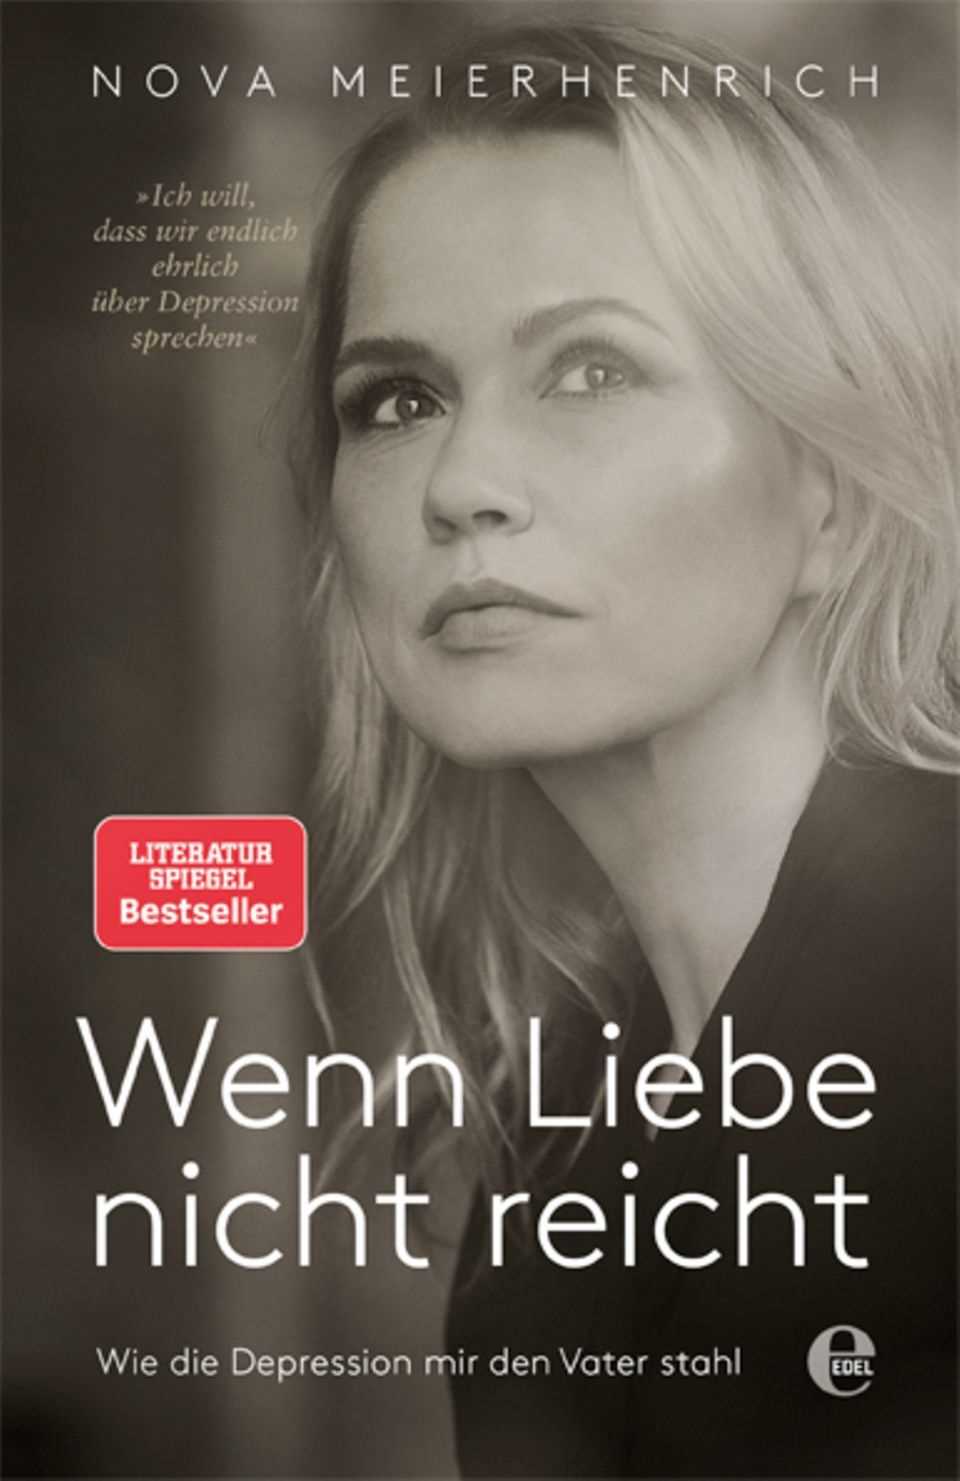 Nova Meierhenrich's book "When love isn't enough" was published on October 5, 2018 and is now a bestseller.